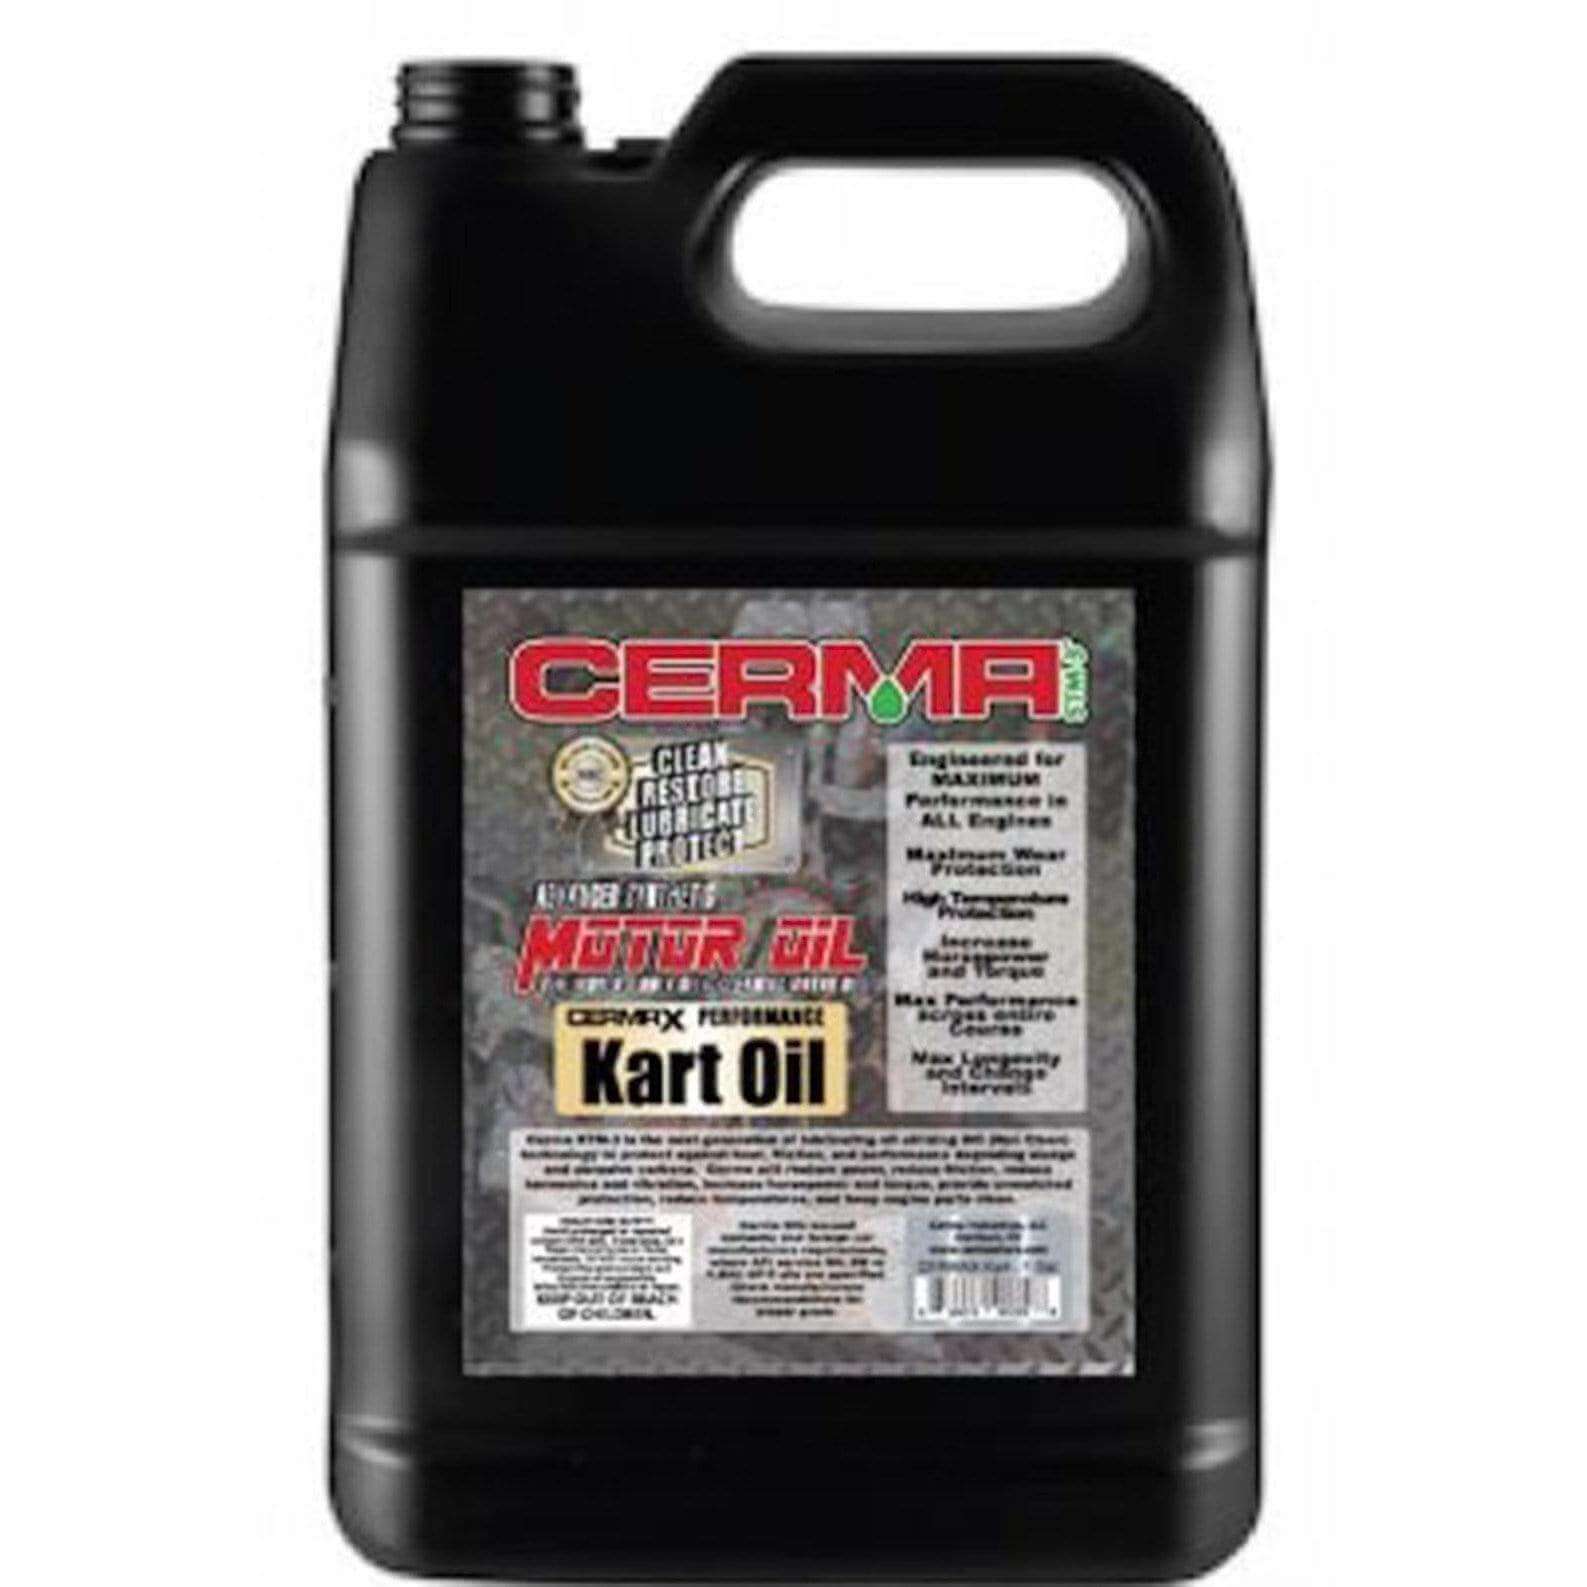 Cermax Ceramic Kart Engine Oil with Cleaning Technology at $87.11 only from cermatreatment.com